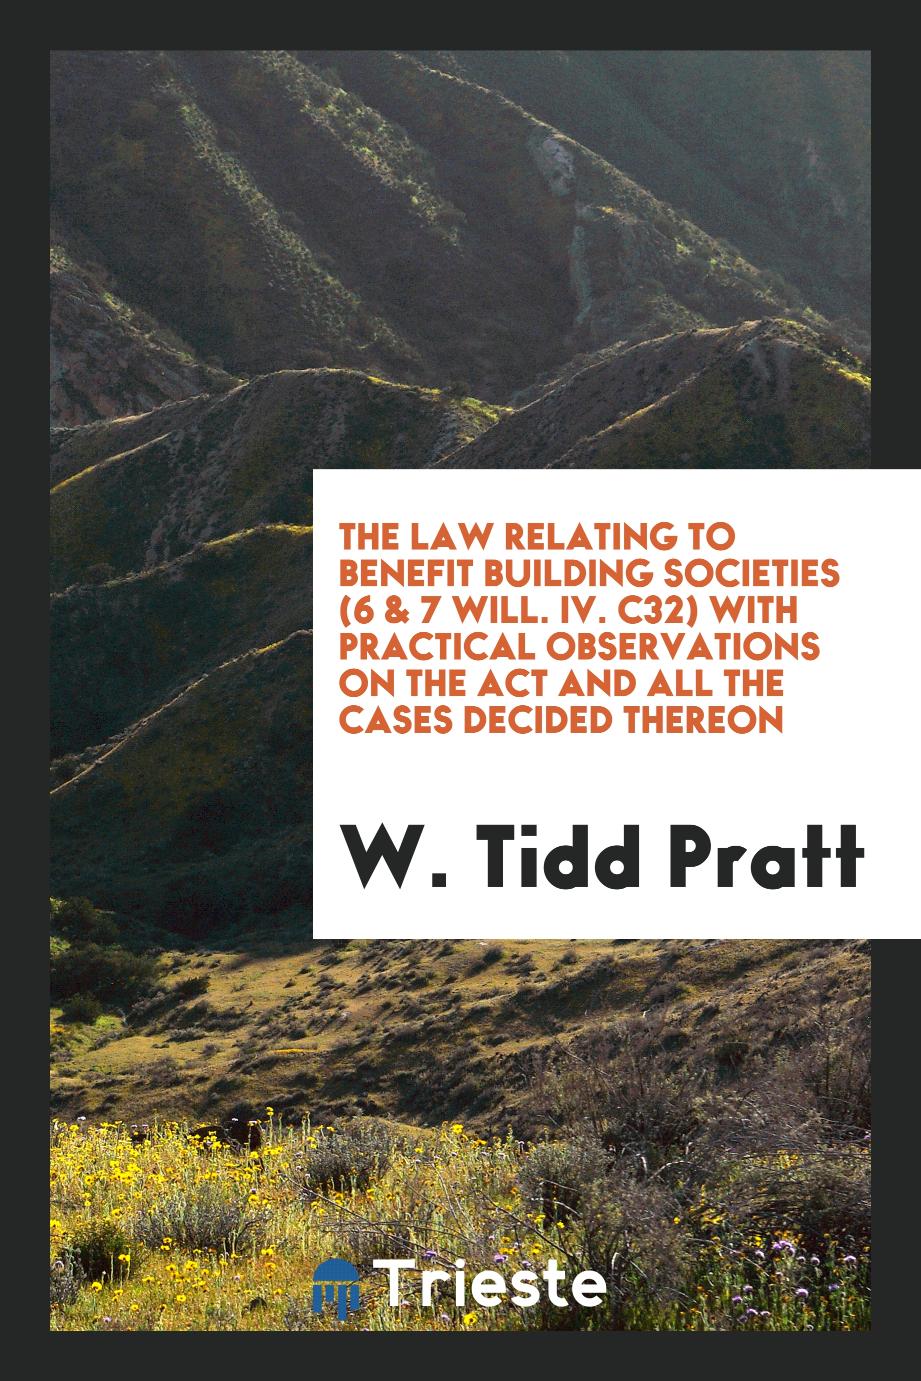 The Law Relating to Benefit Building Societies (6 & 7 Will. IV. C32) with Practical Observations on the Act and All the Cases Decided Thereon